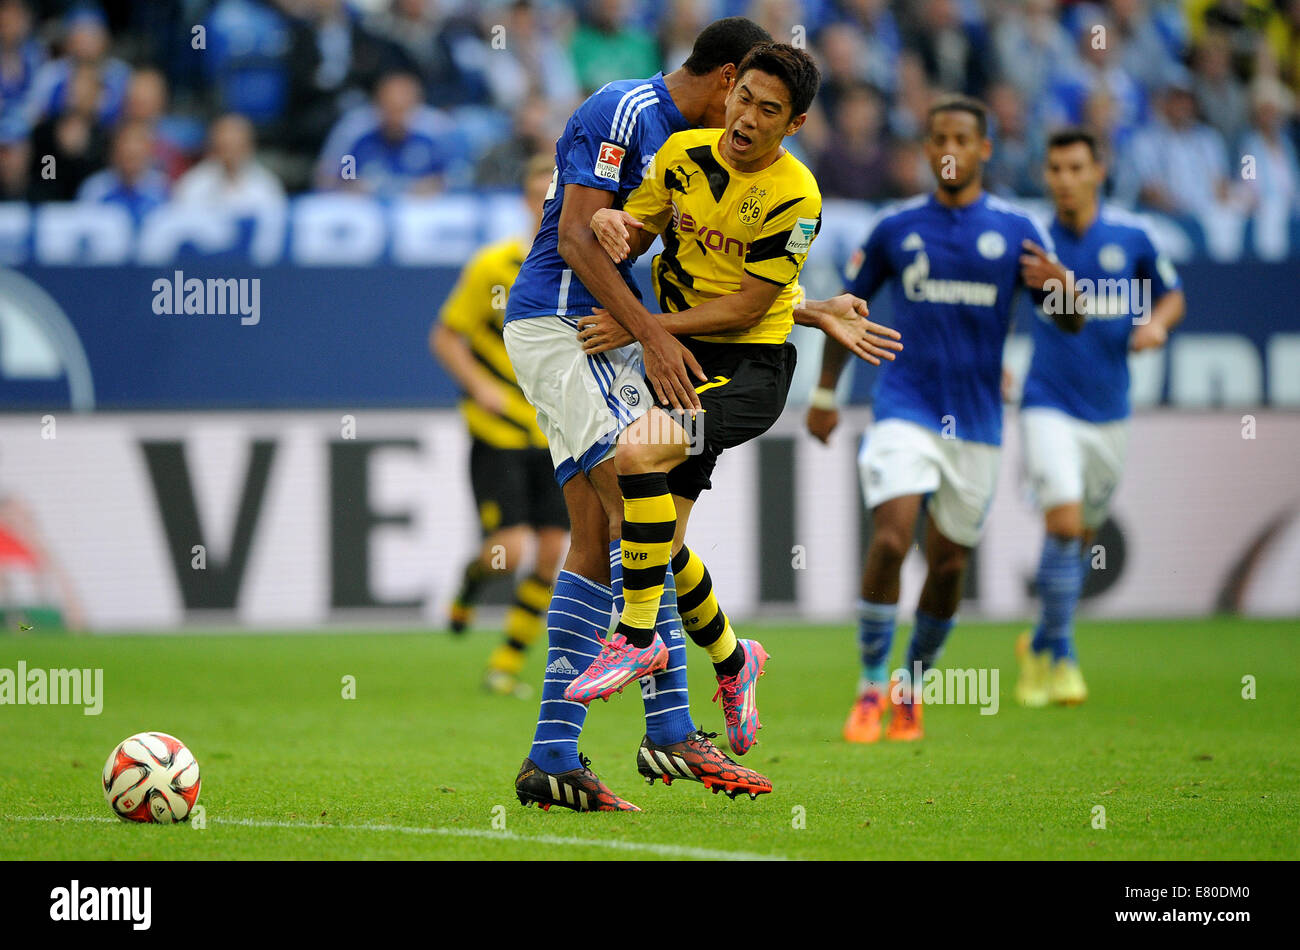 Gelsenkirchen, Germany. 27th Sep, 2014. Dortmund's Shinji Kagawa (R) vies for the ball with Schalke's Joel Matip (L) during the German Bundesliga soccer match between FC Schalke 04 and Borussia Dortmund at Veltins Arena in Gelsenkirchen, Germany, 27 September 2014. Photo: Jonas Guettler/dpa (ATTENTION: The DFL limits the utilisation and publication of sequential pictures on the internet and other online media during the match on 15 pictures per game.)/dpa/Alamy Live News Stock Photo